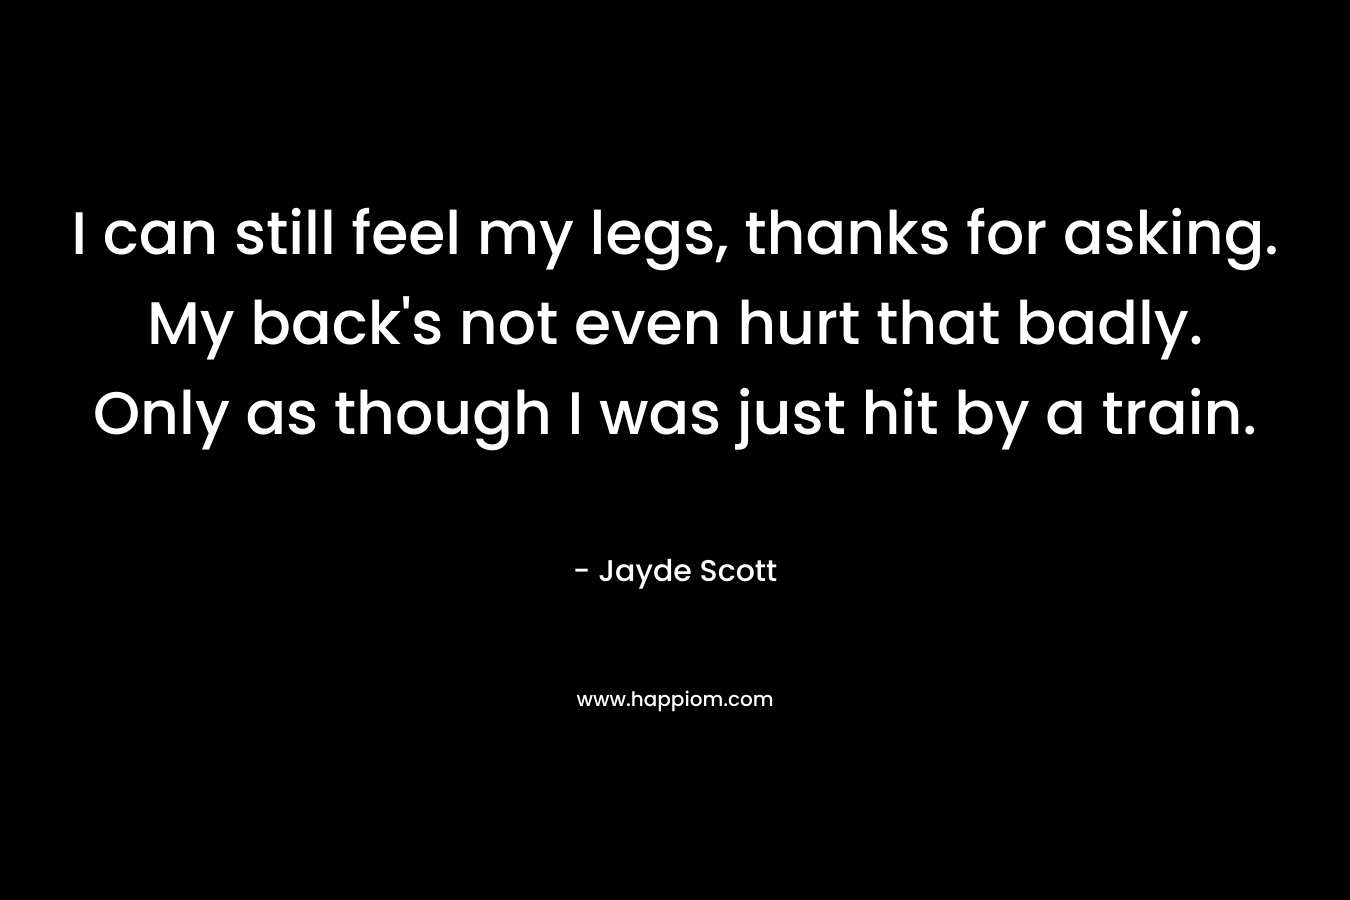 I can still feel my legs, thanks for asking. My back’s not even hurt that badly. Only as though I was just hit by a train. – Jayde Scott